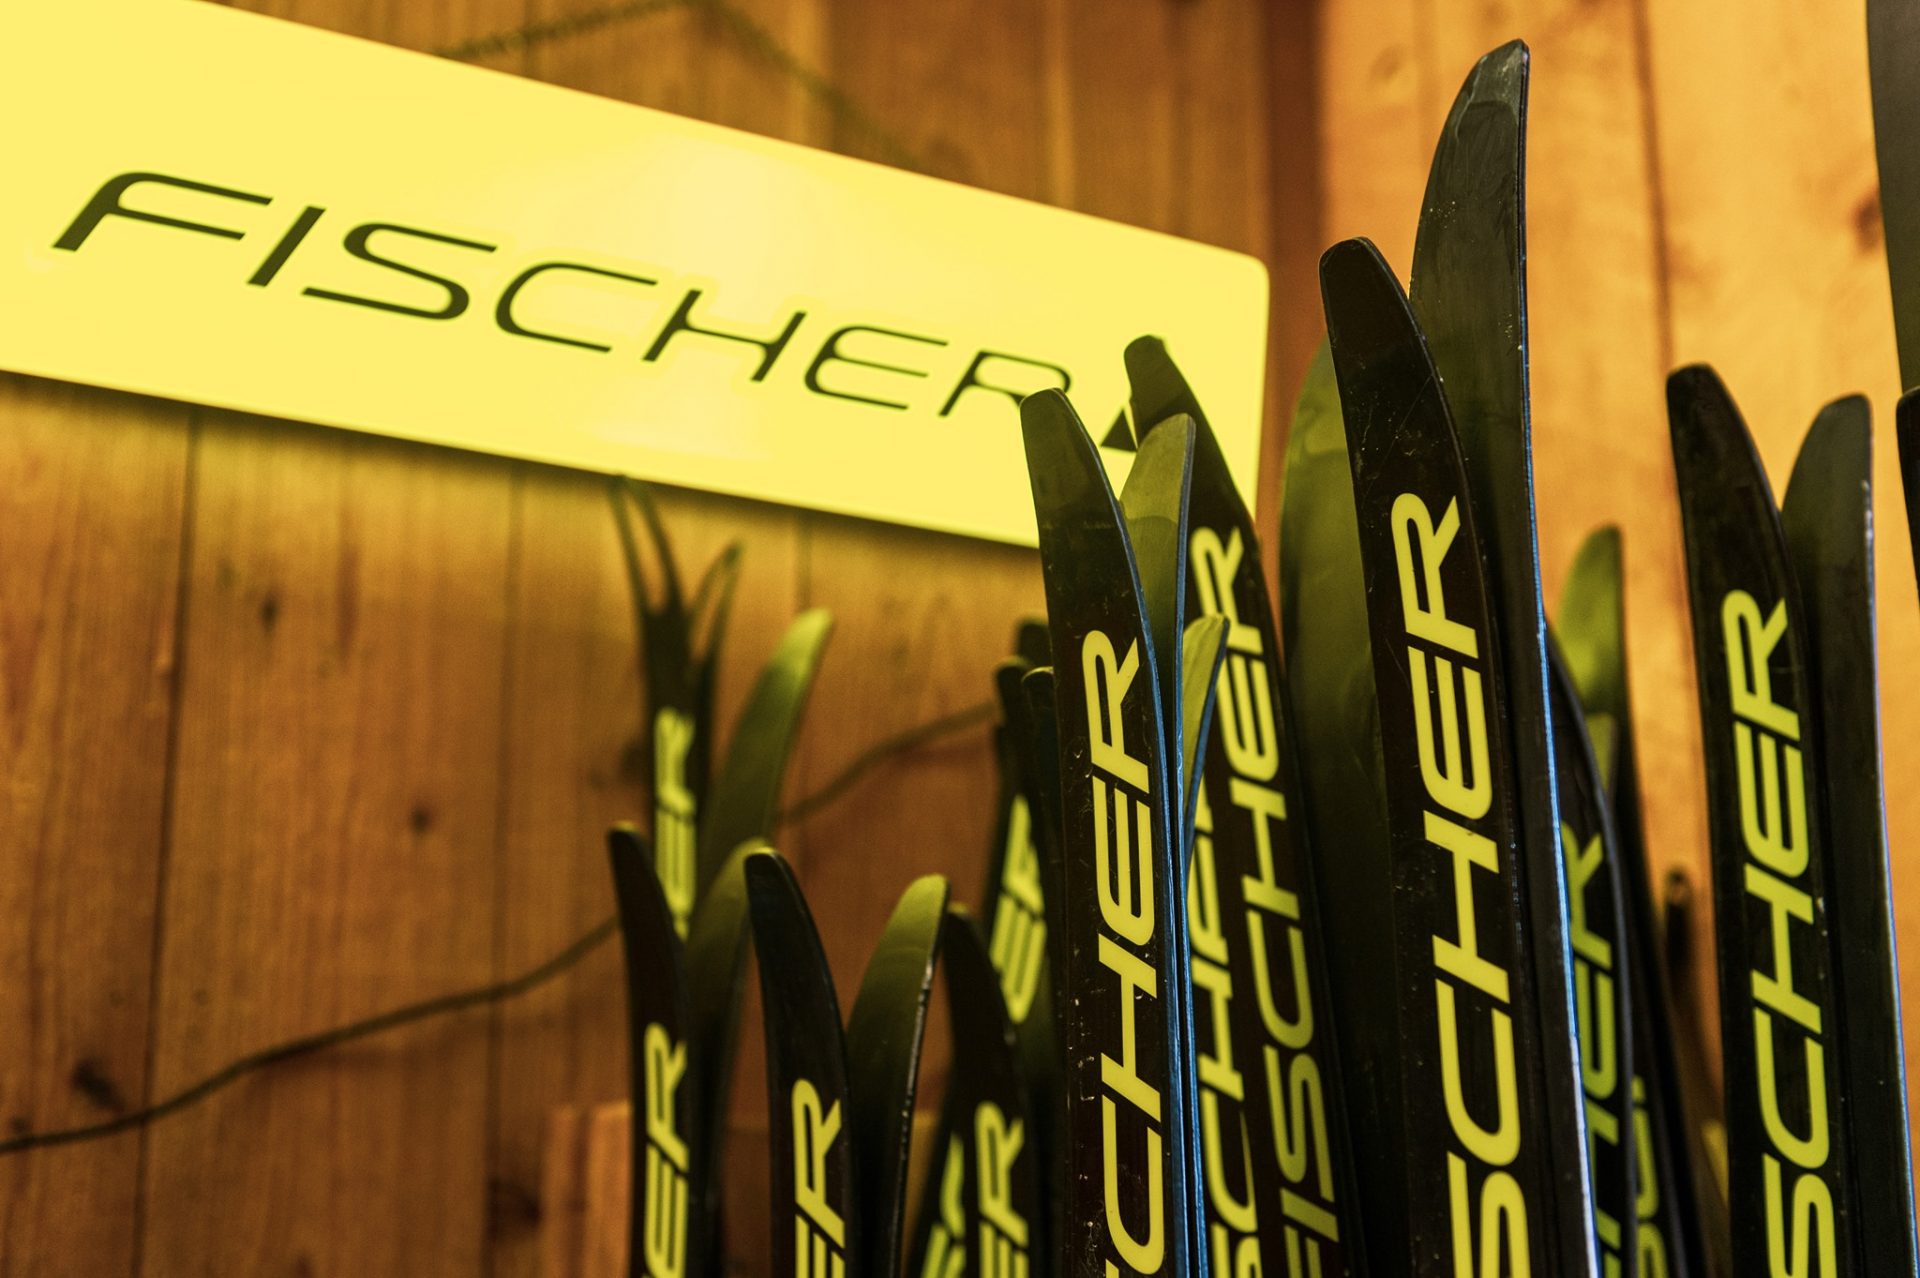 Fischer cross country skis and logo light